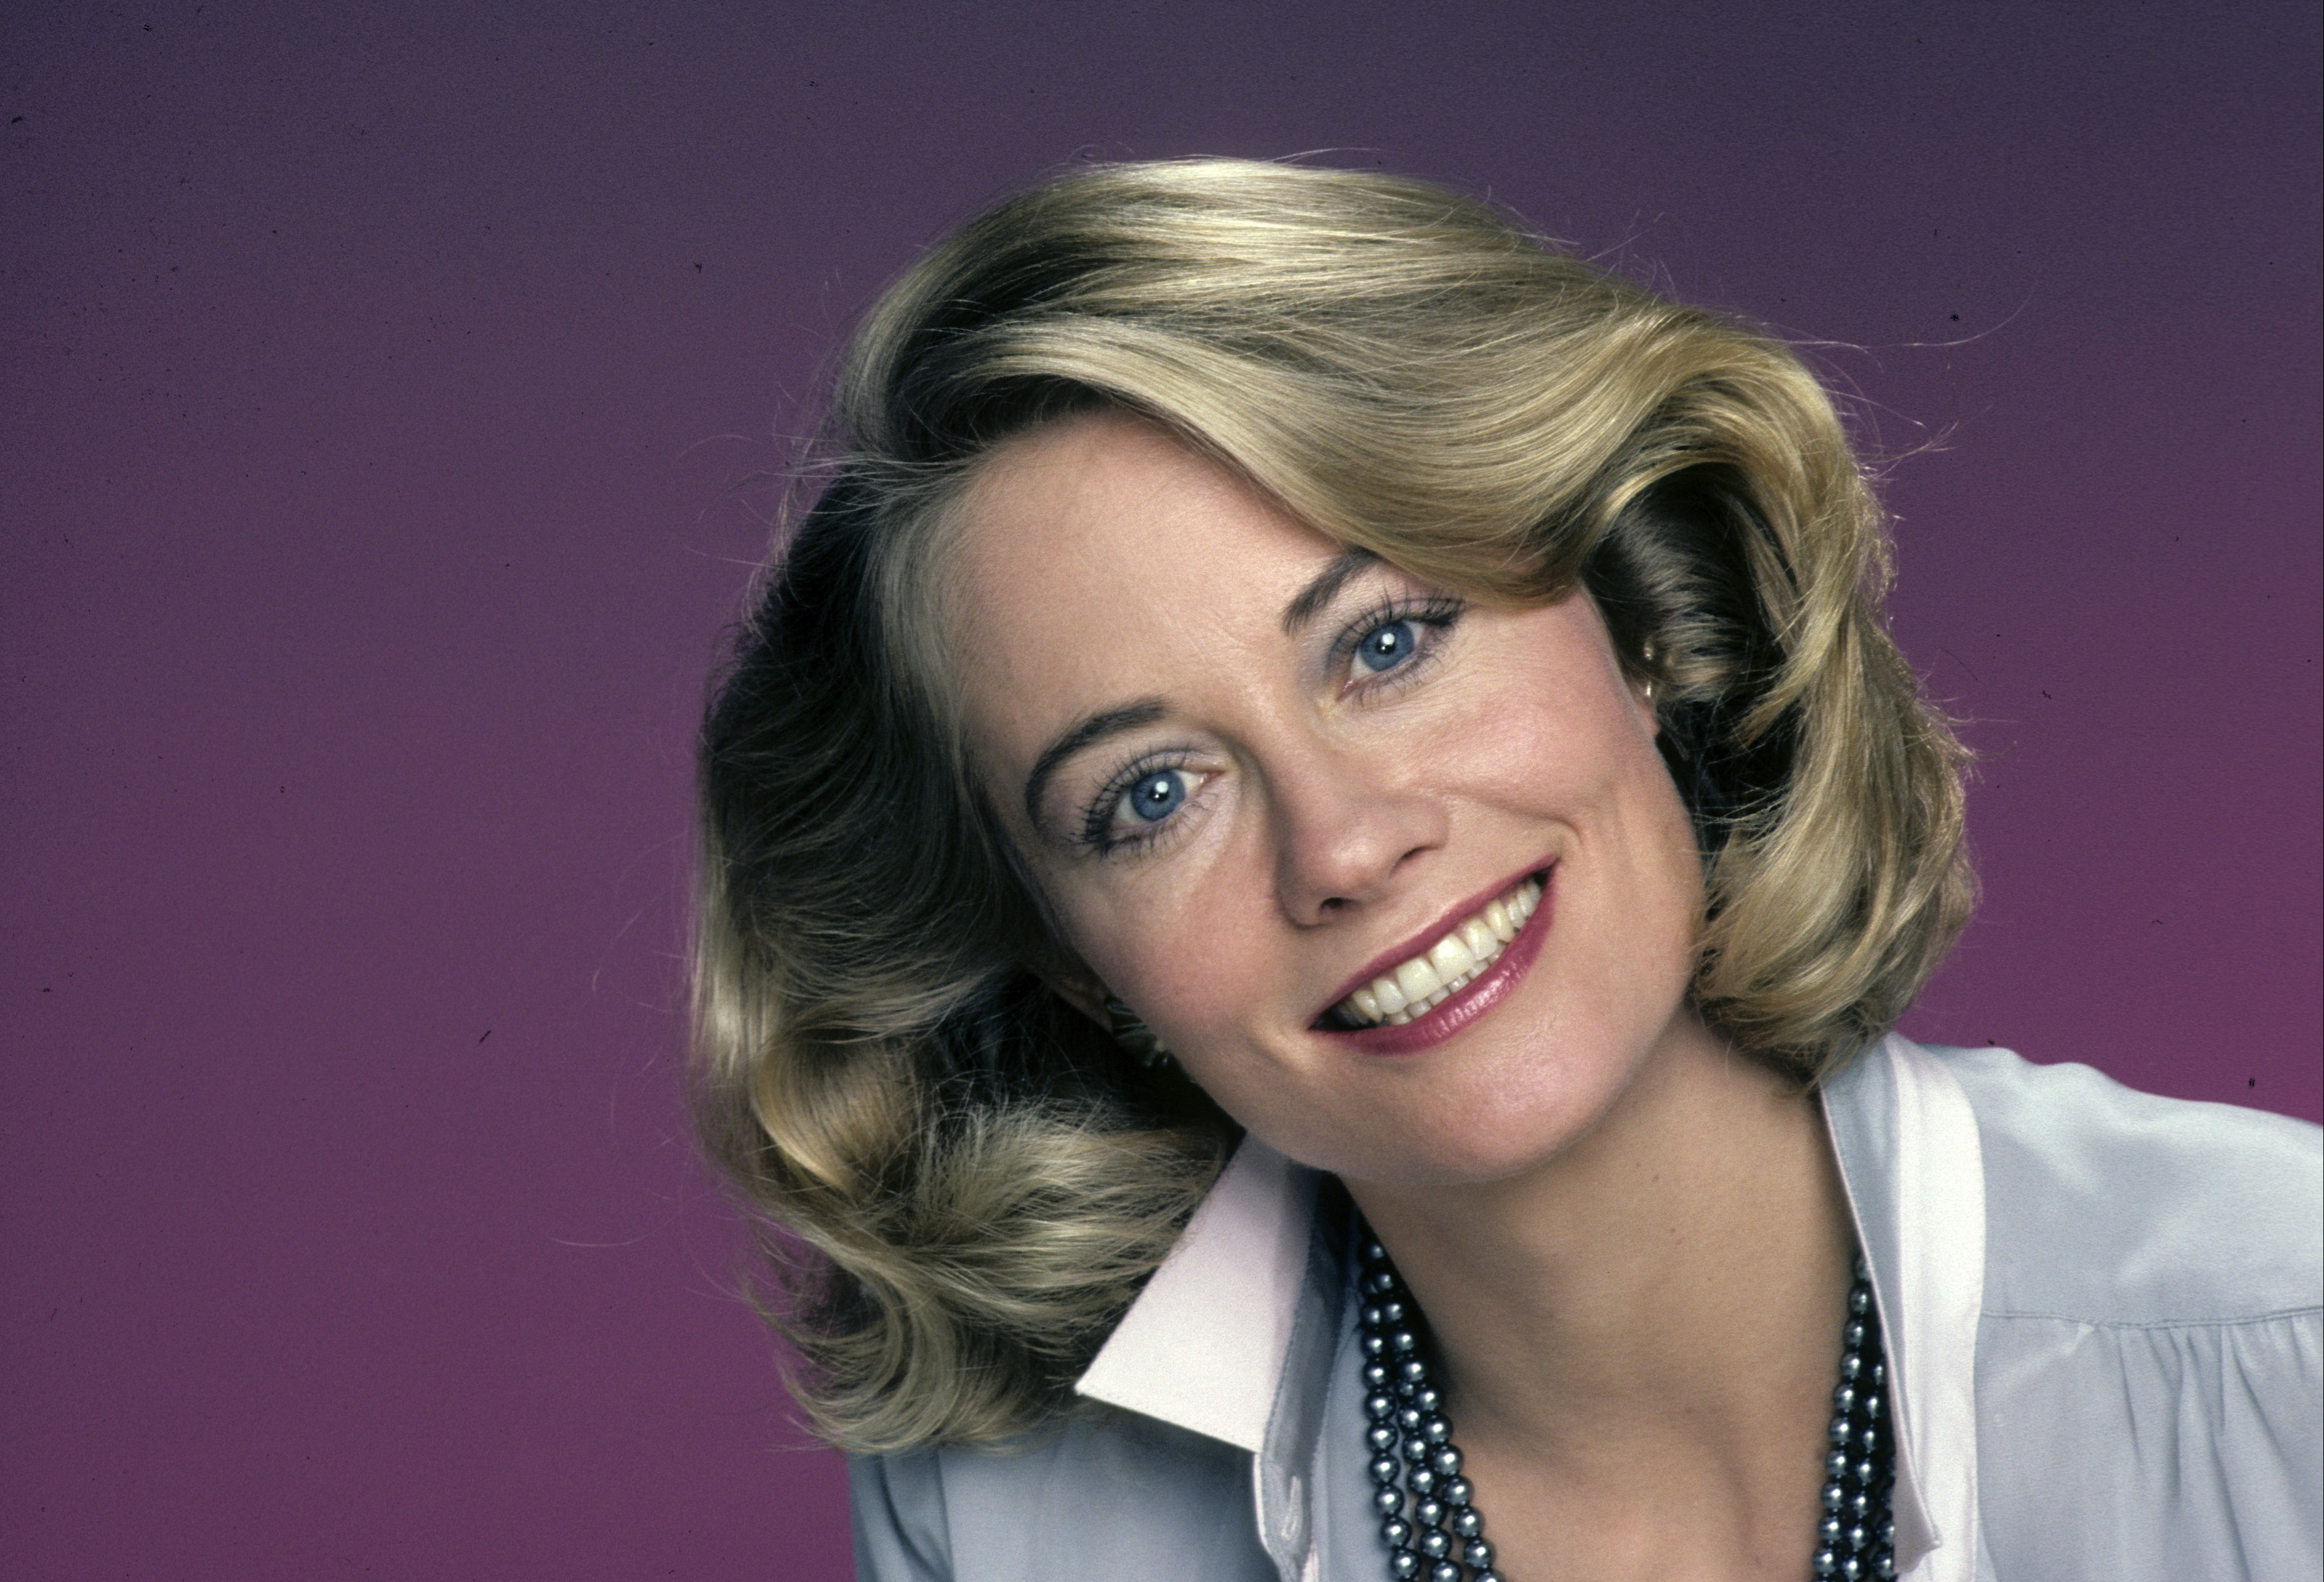 Cybill Shepherd pictured on January 21, 1985. | Source: Getty Images